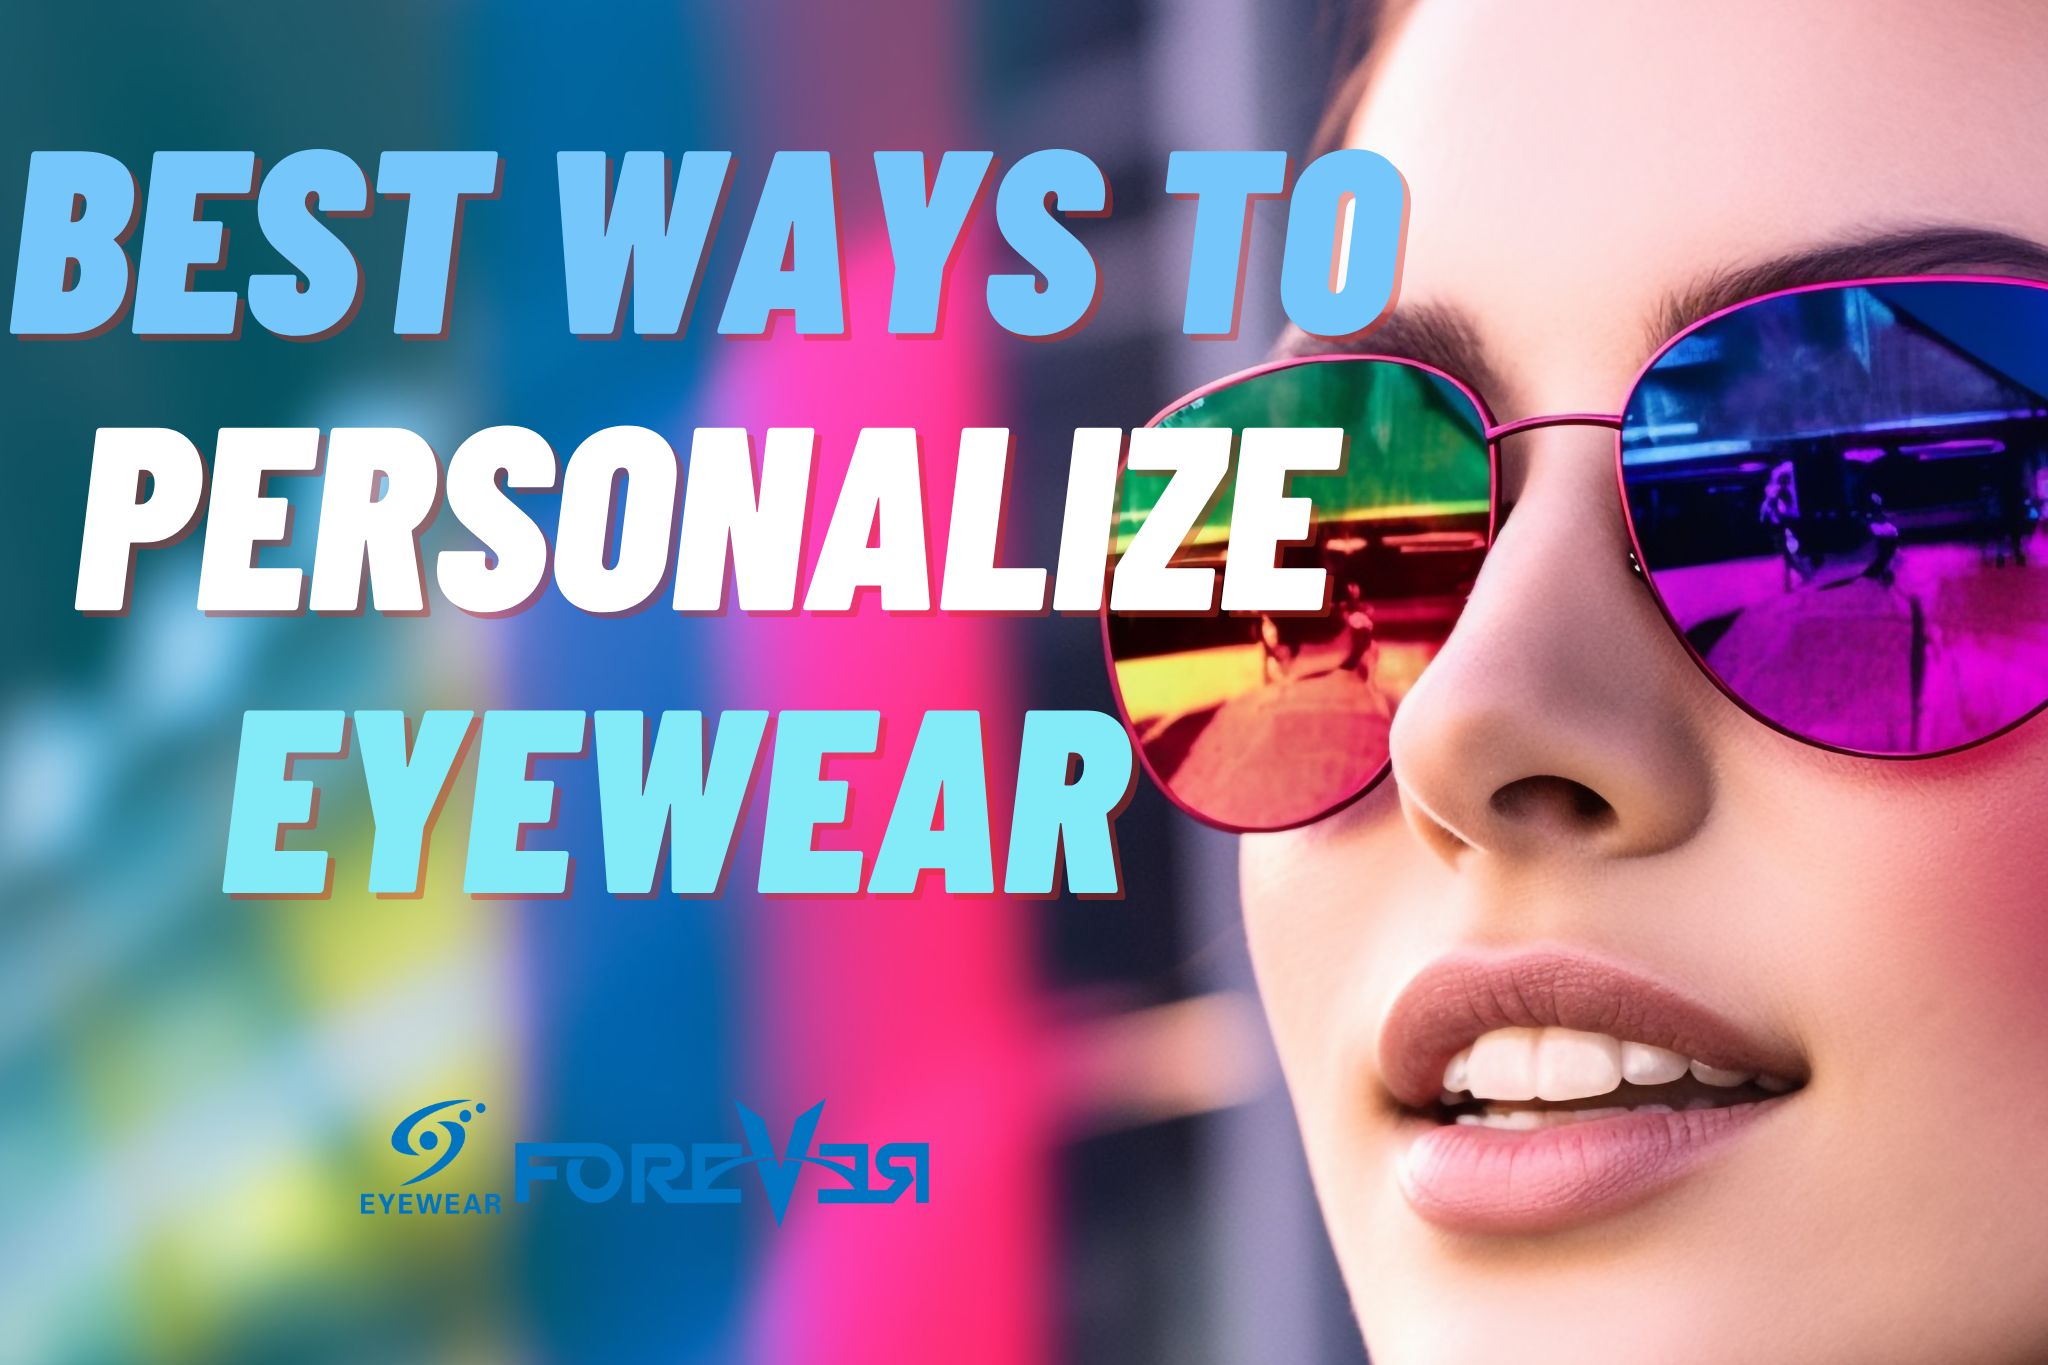 Best Ways to Personalize Eyeglasses